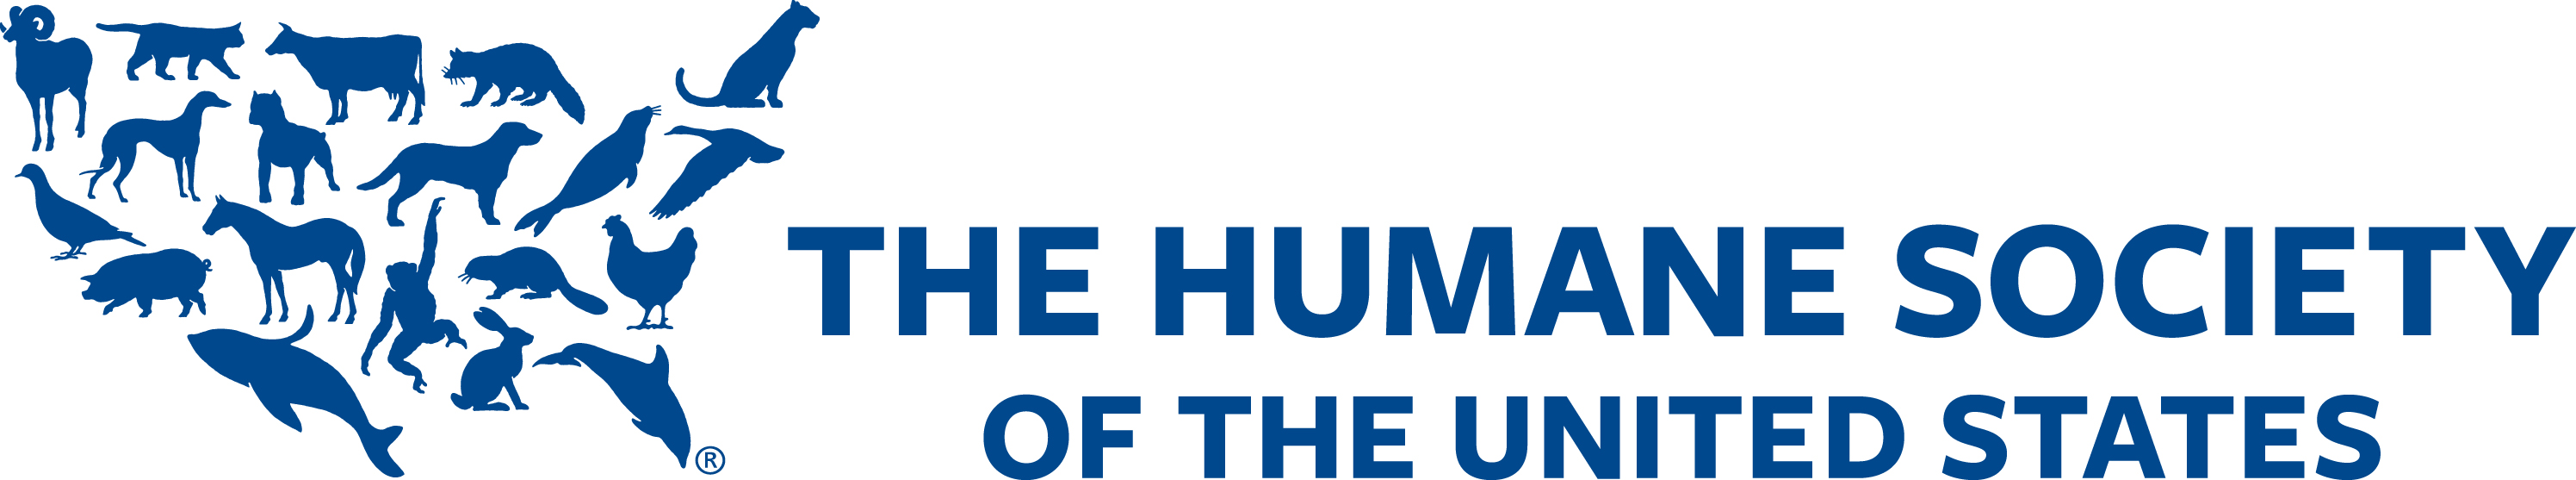 The Humane Society of the United States (The HSUS) Logo